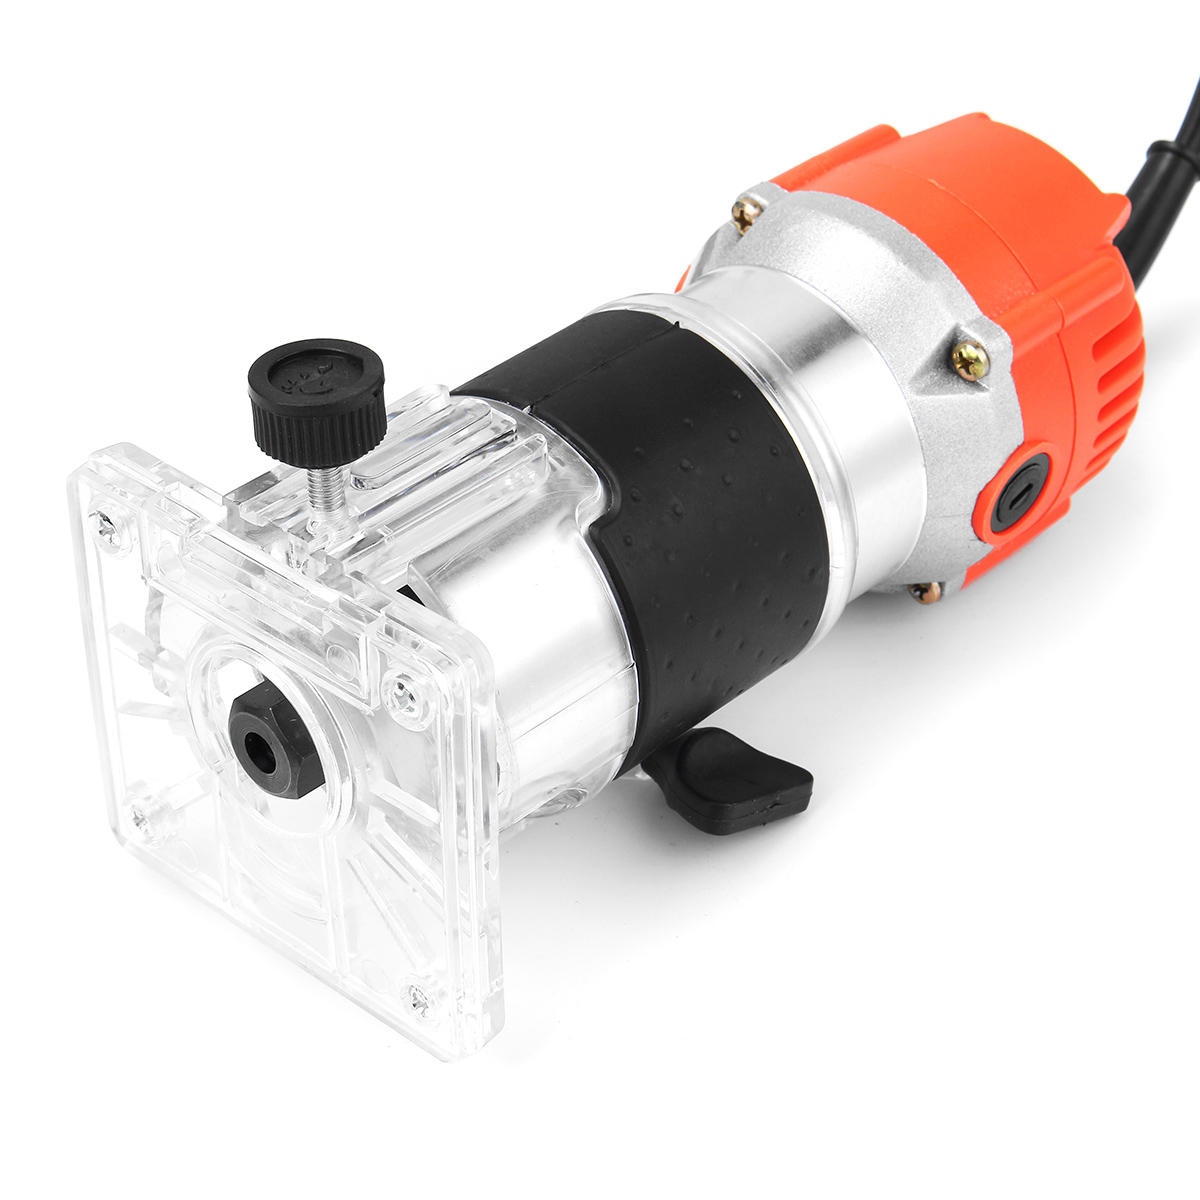 Image of Raitool™ 220V 680W 30000RPM Wood Corded Electric Hand Trimmer DIY Tool Router 635MM